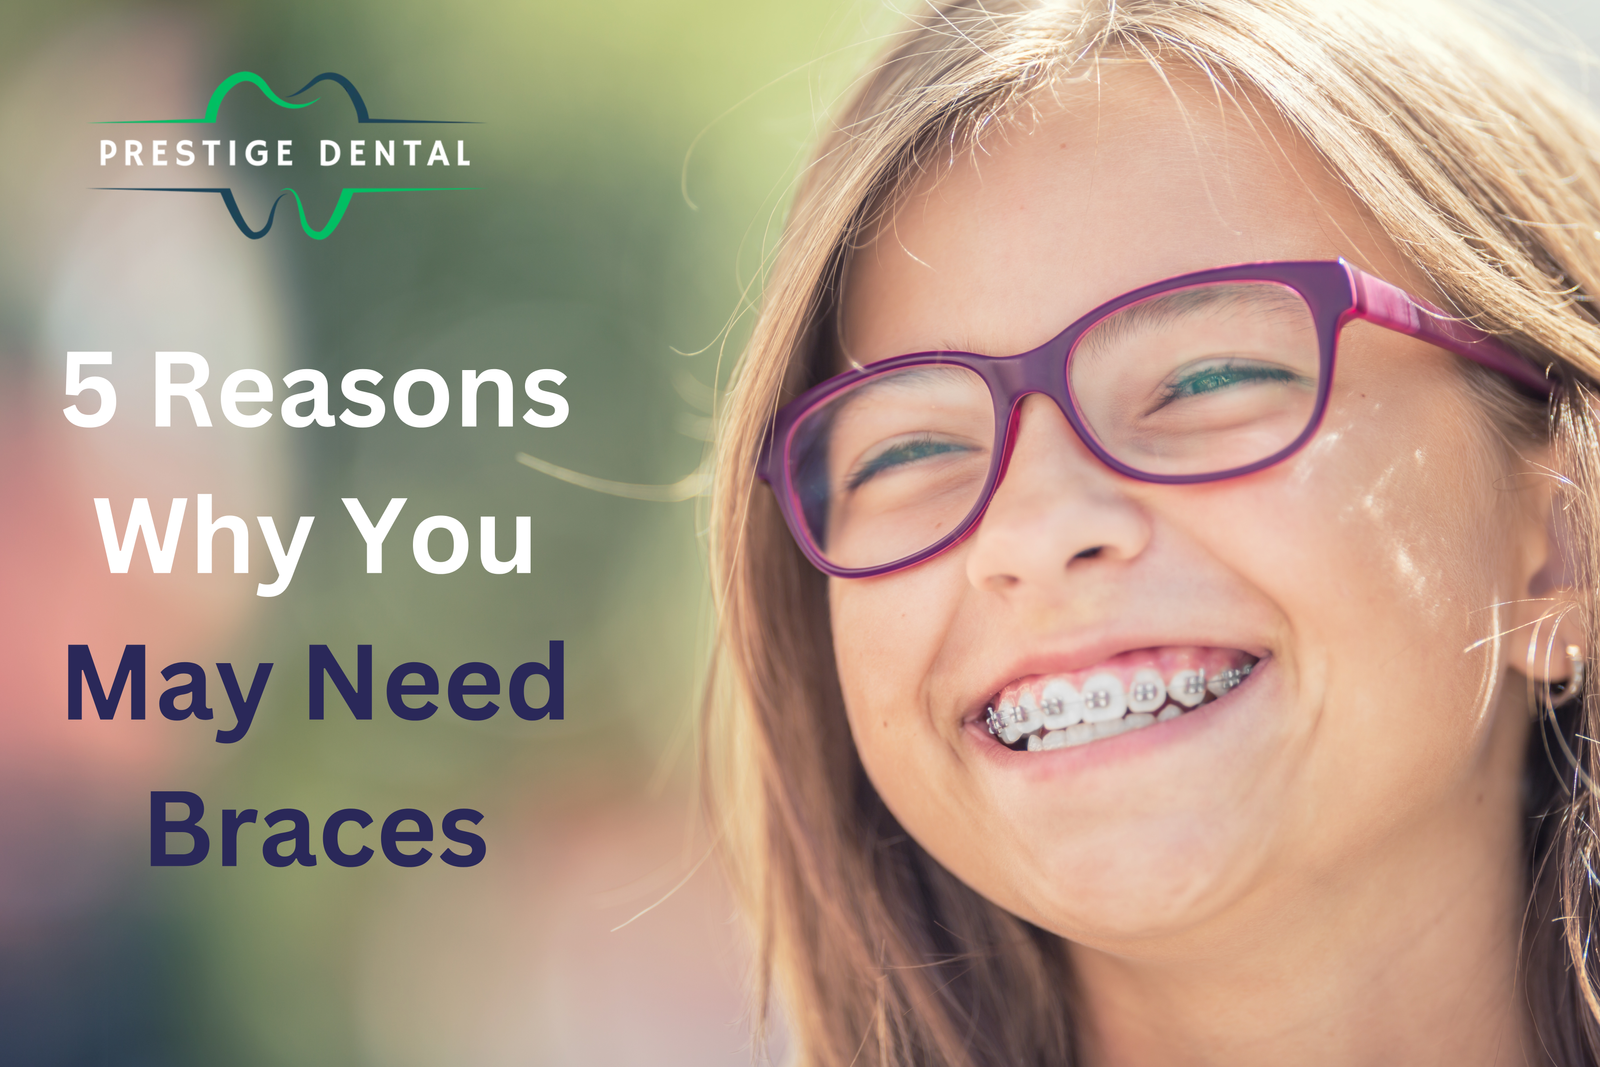 5 Reasons Why You May Need Braces